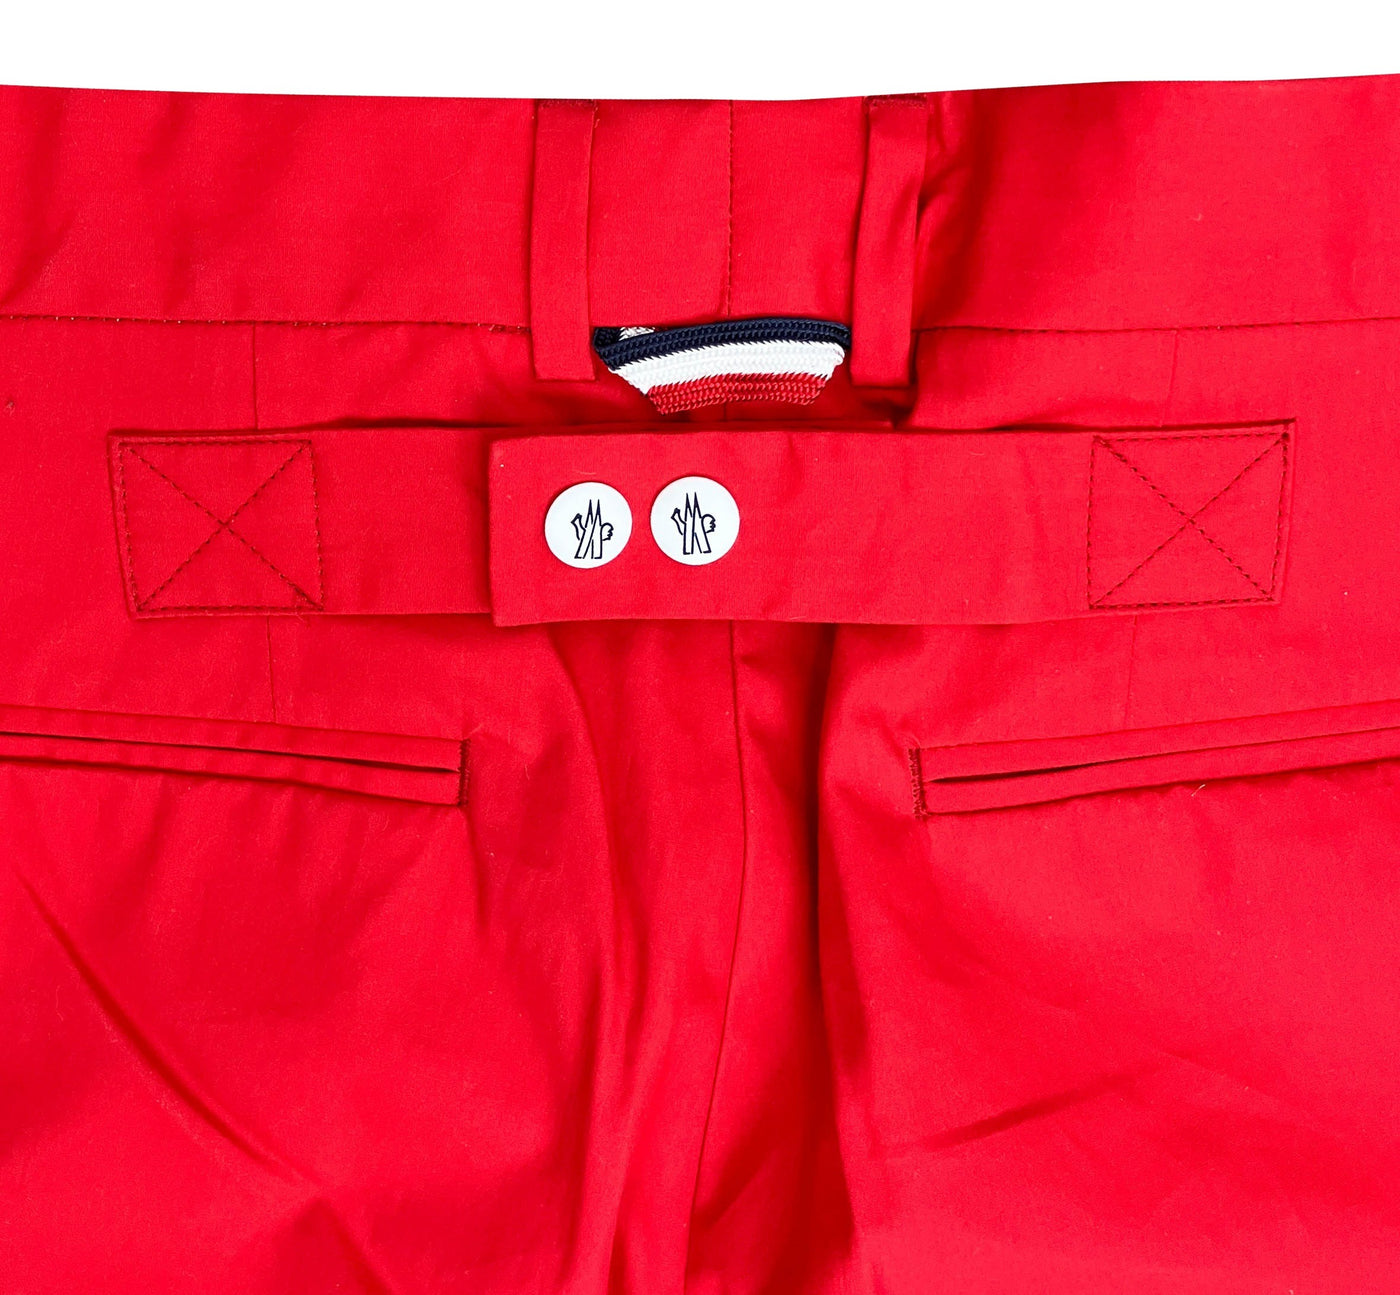 Moncler Gamme Bleu Trousers in Red - Discounts on Moncler at UAL